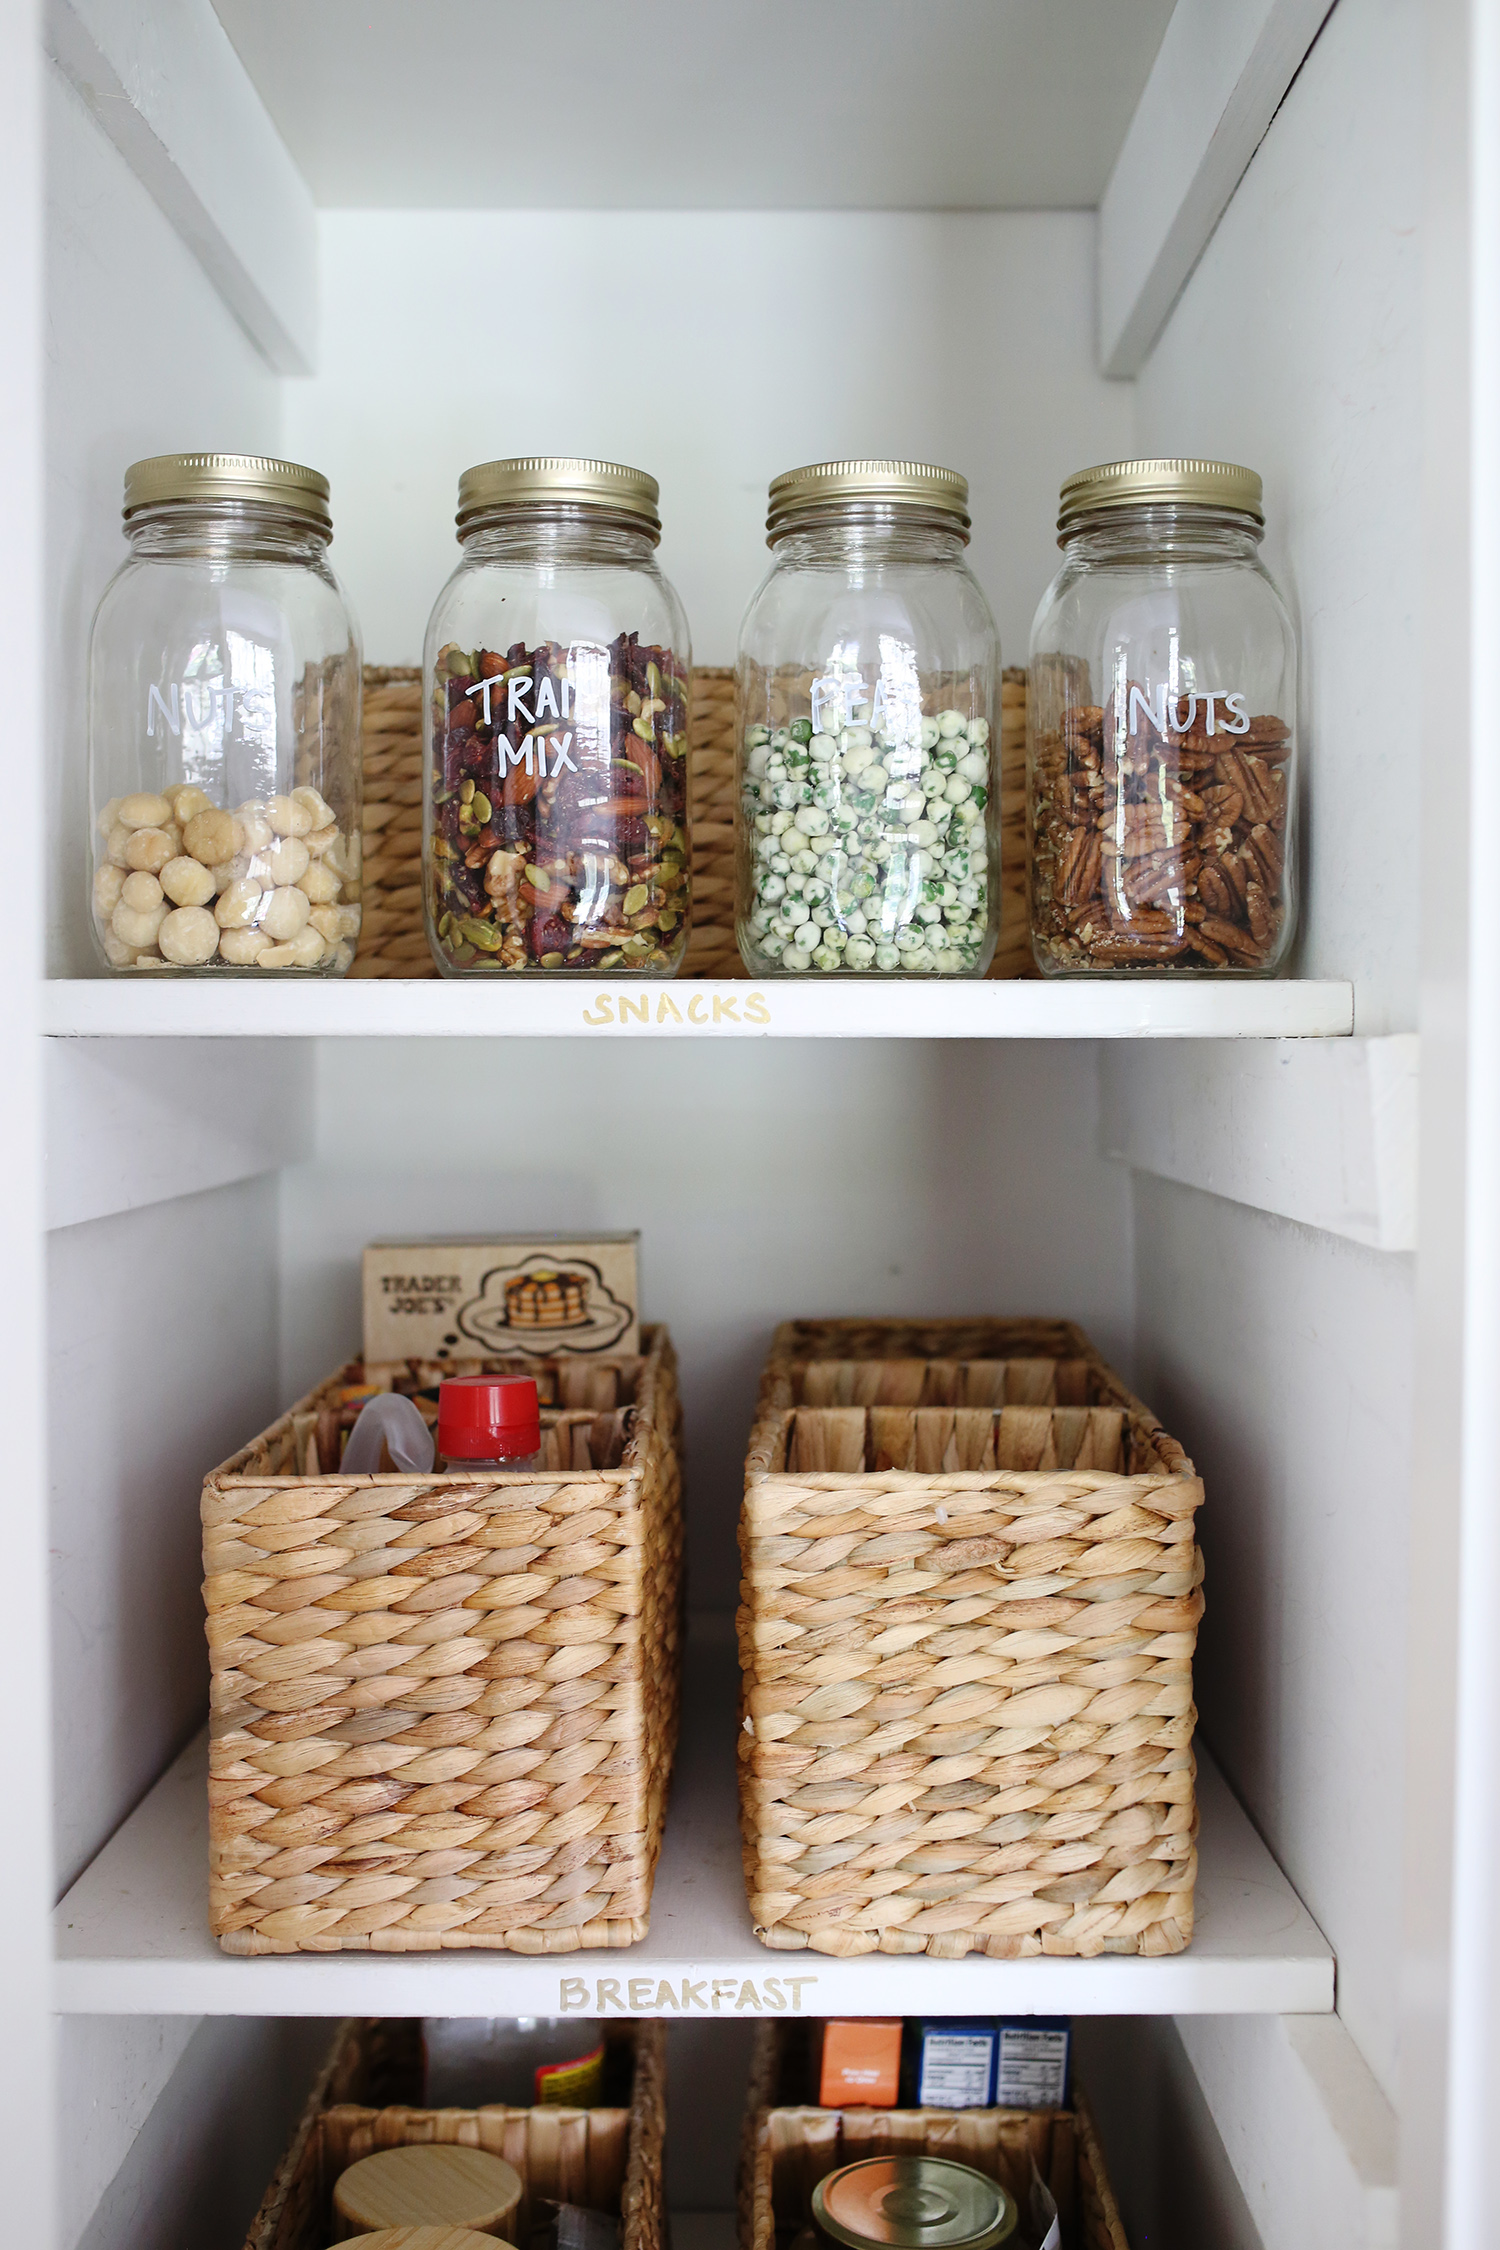 view of inside the pantry with jars of nuts and baskets on shelves